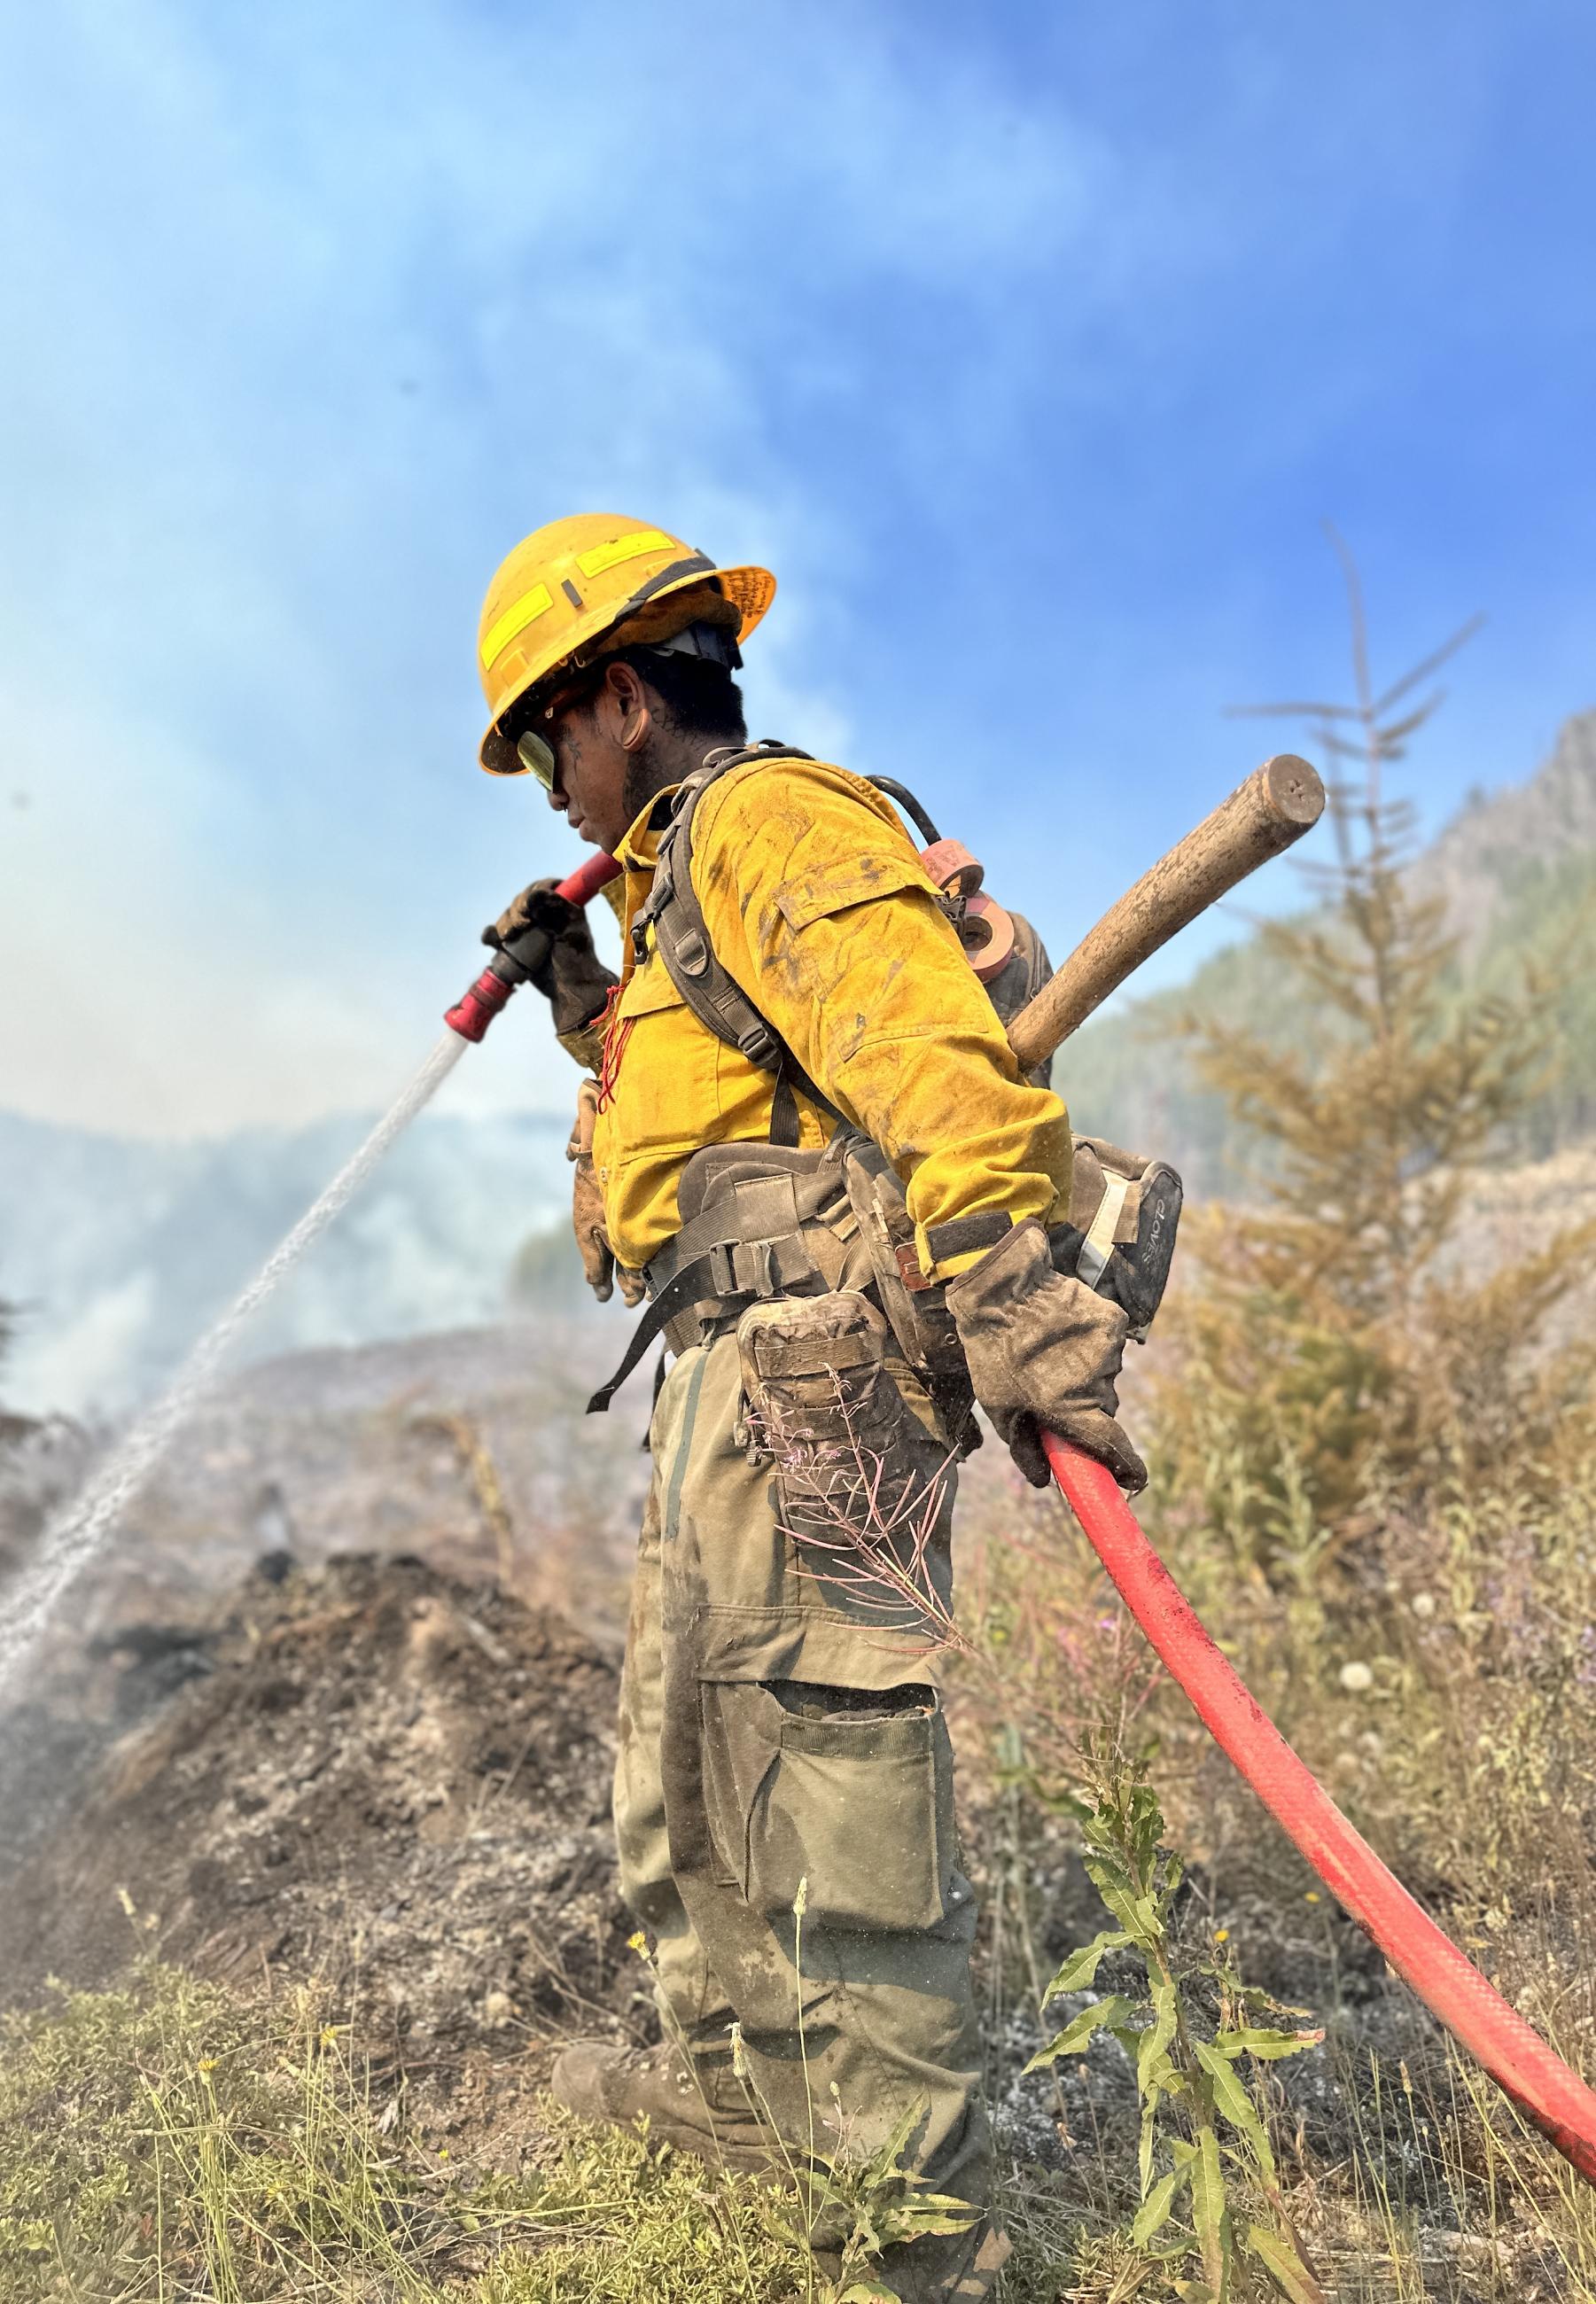 A firefighter uses a hose to mop-up a hot spot.